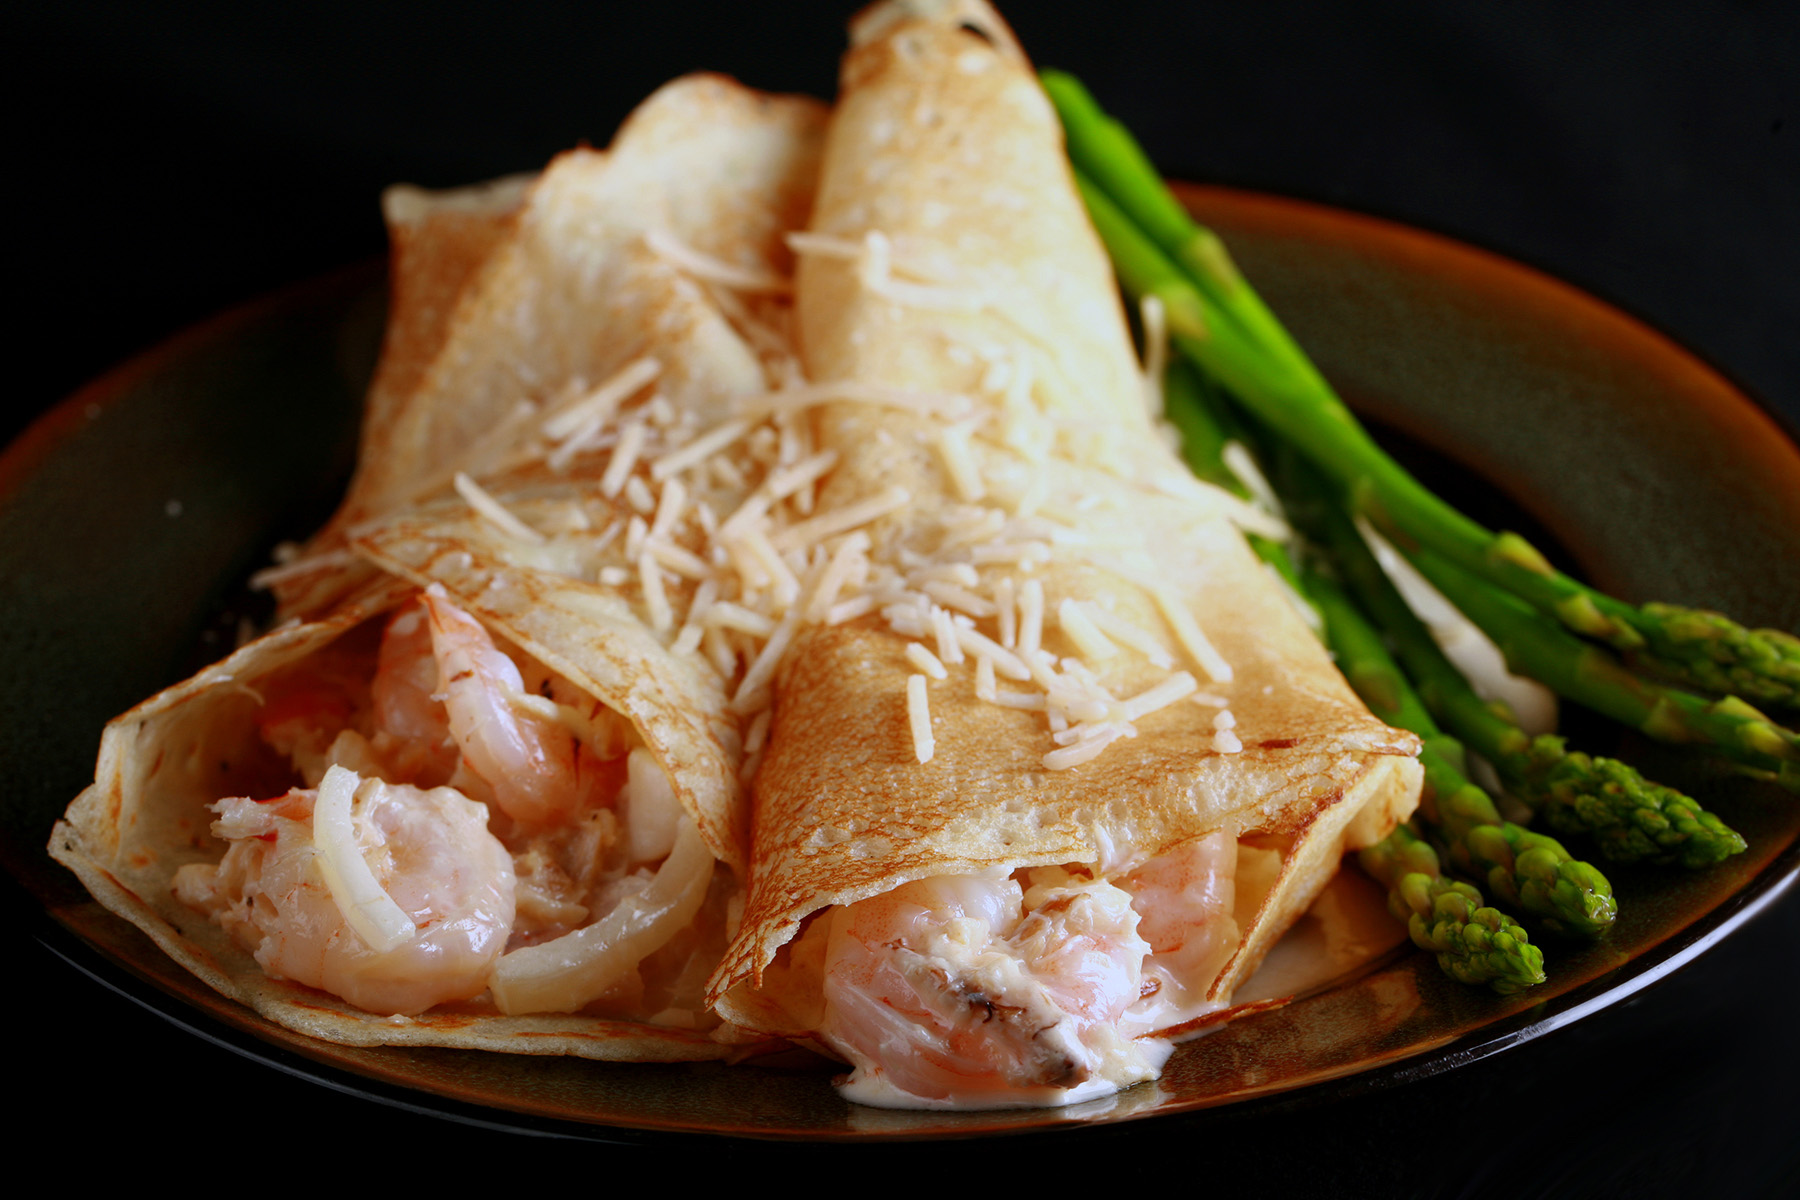 Two gluten free crepes stuffed with seafood and white wine sauce.